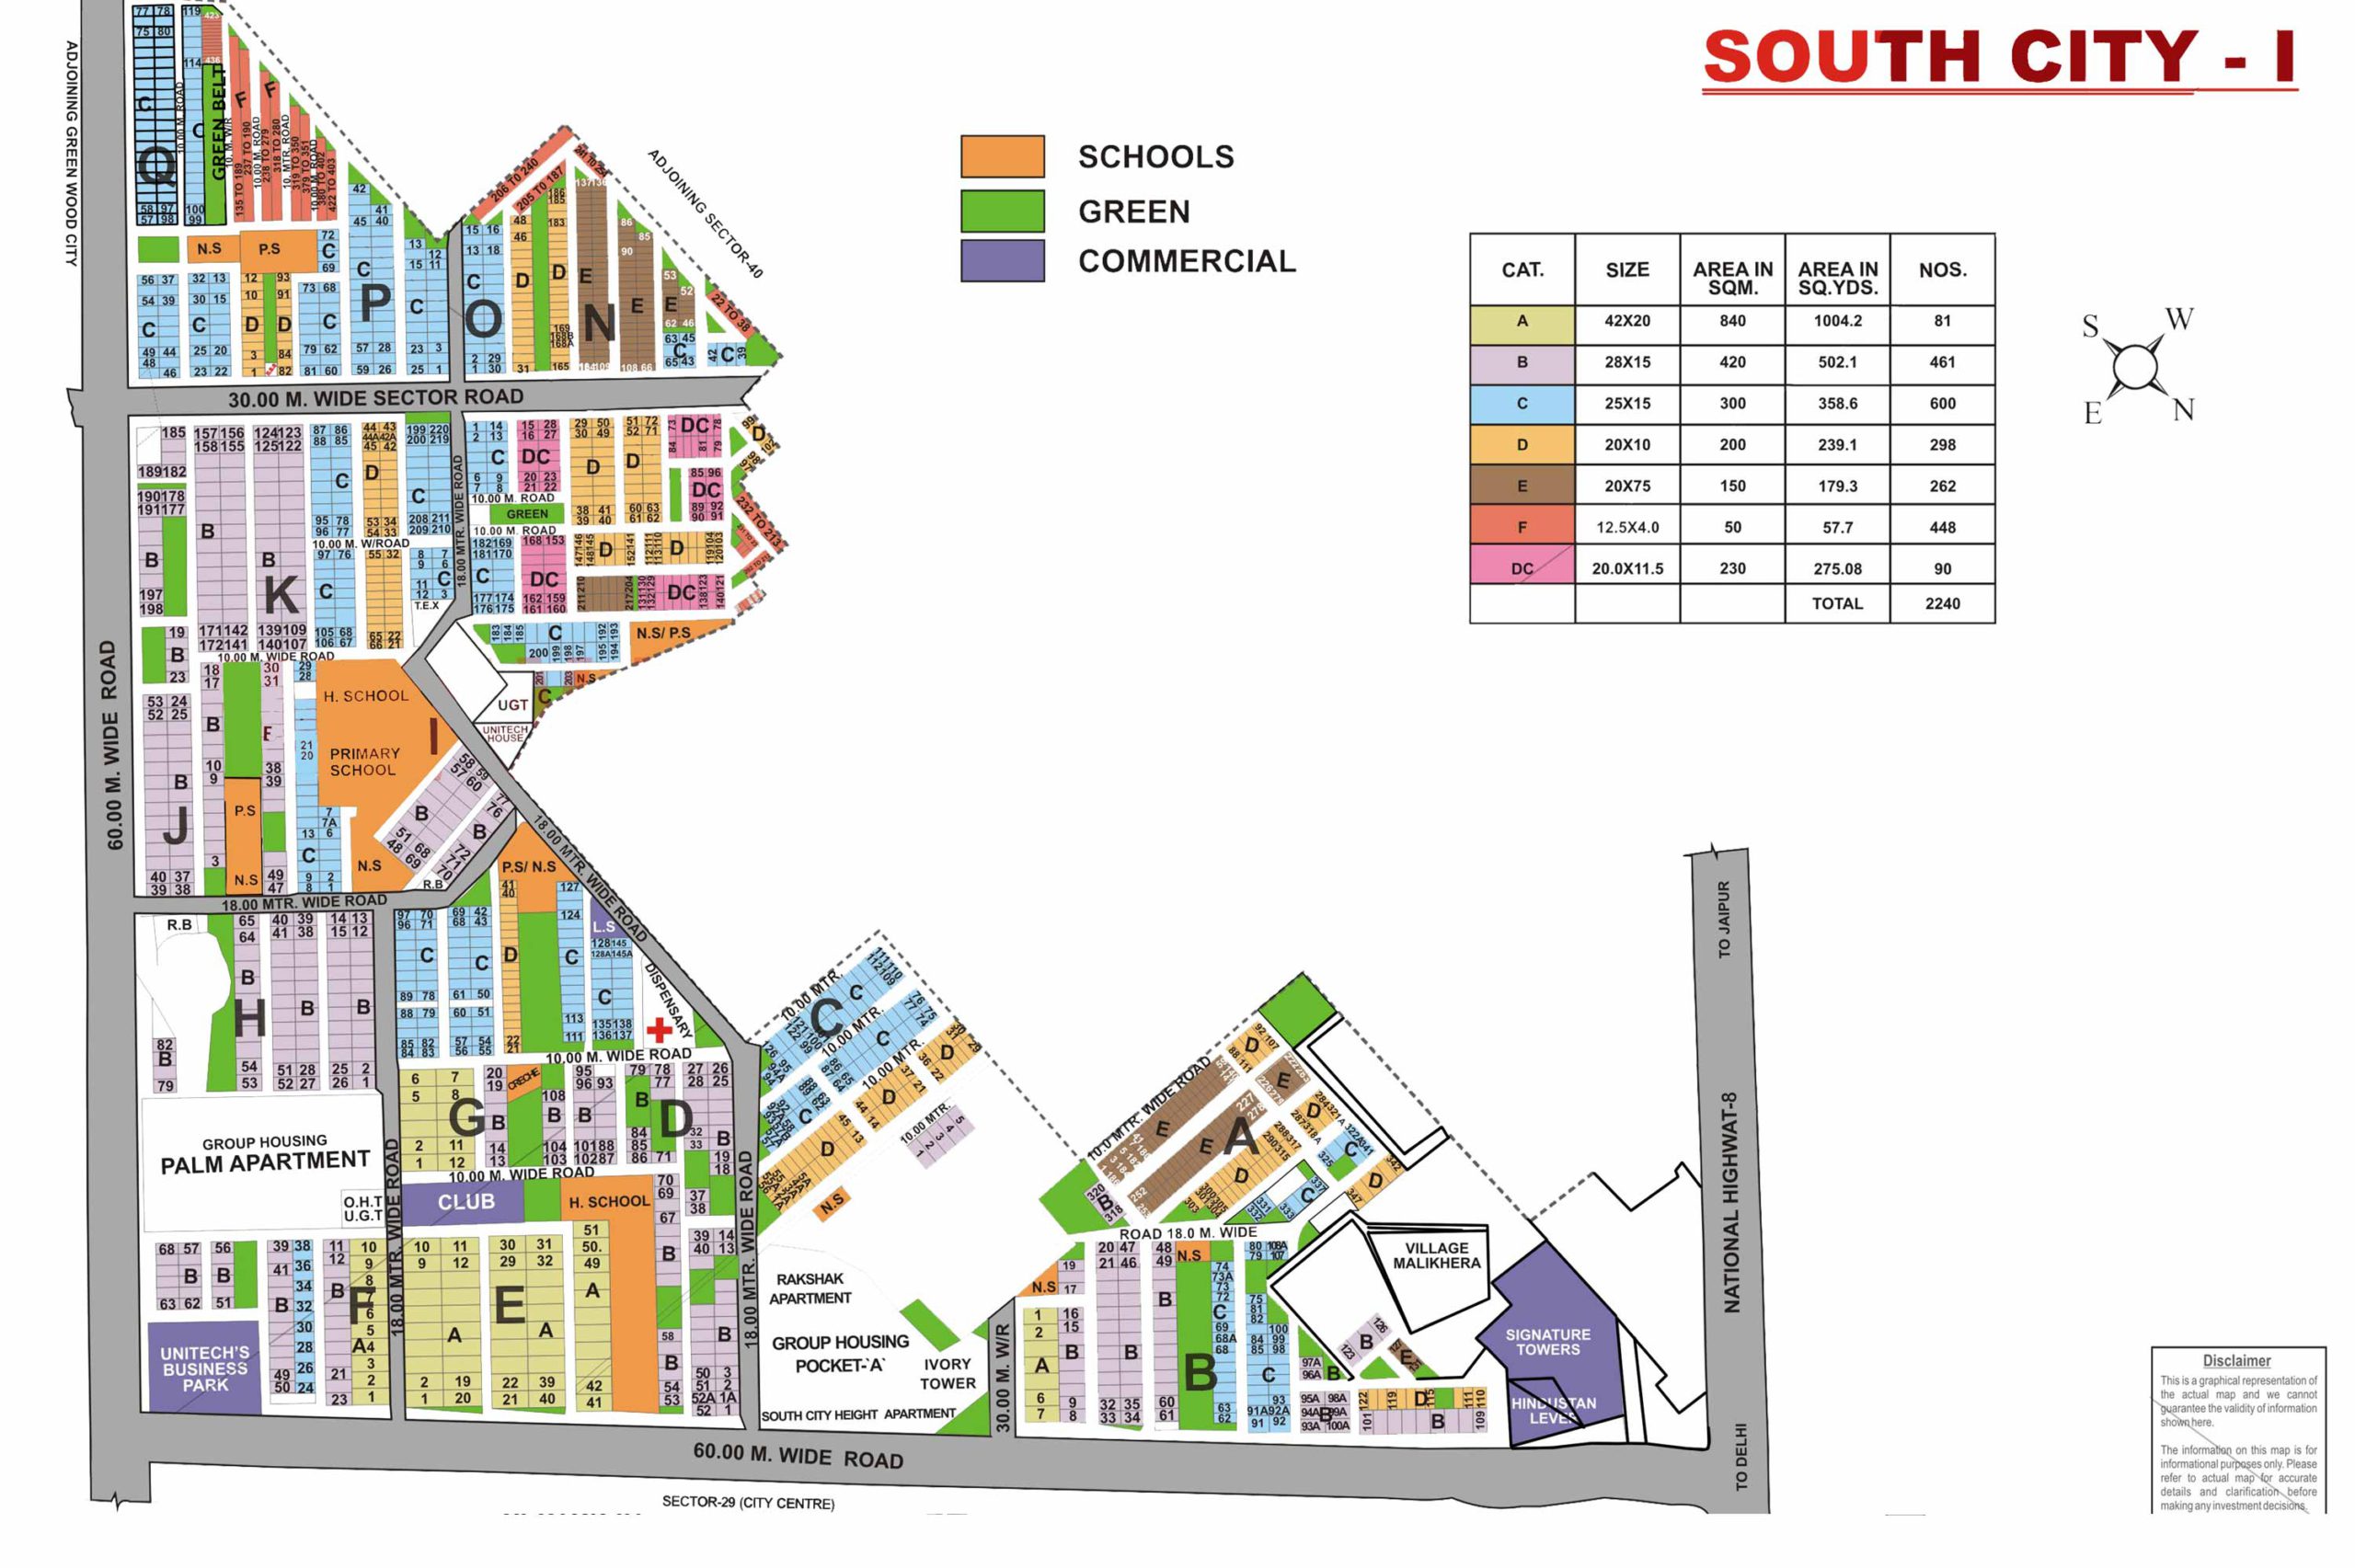 South City 1 Plot for Sale || Plots For Sale in South City 1, Gurgaon || Plot in South City 1, Gurgaon